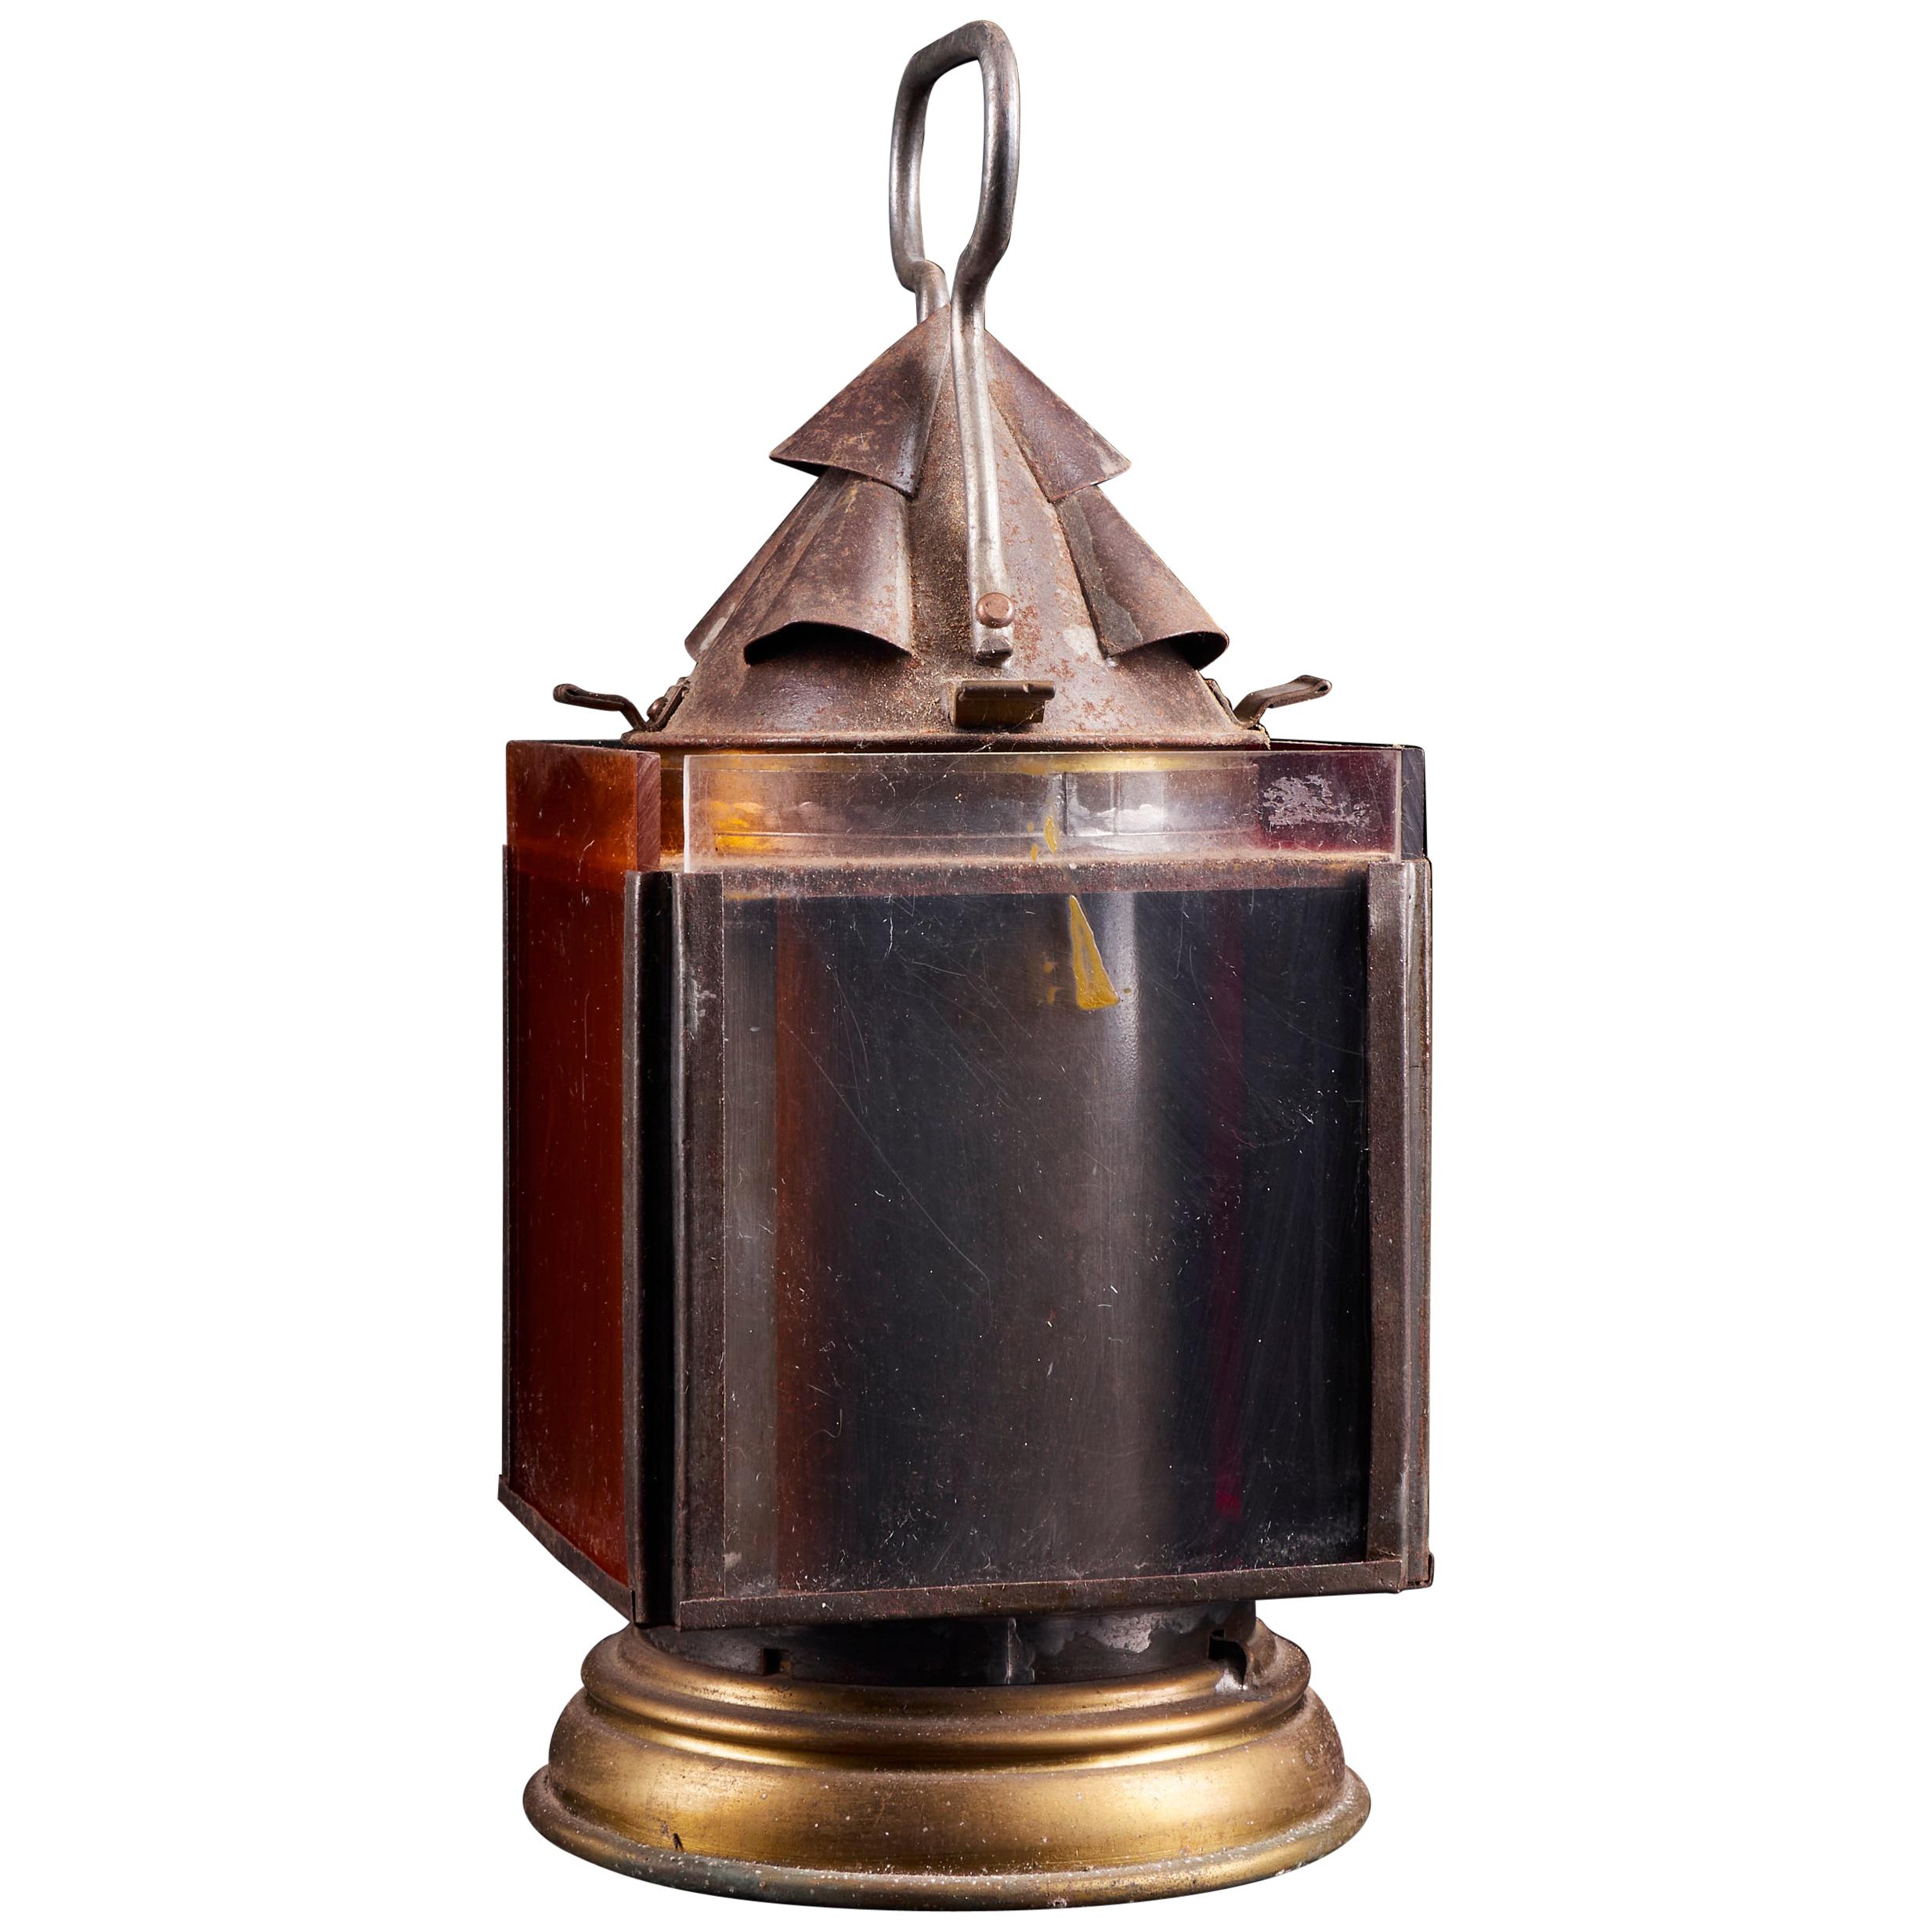 Vintage Signal Oil Lantern with 4 Colored Glass Panels